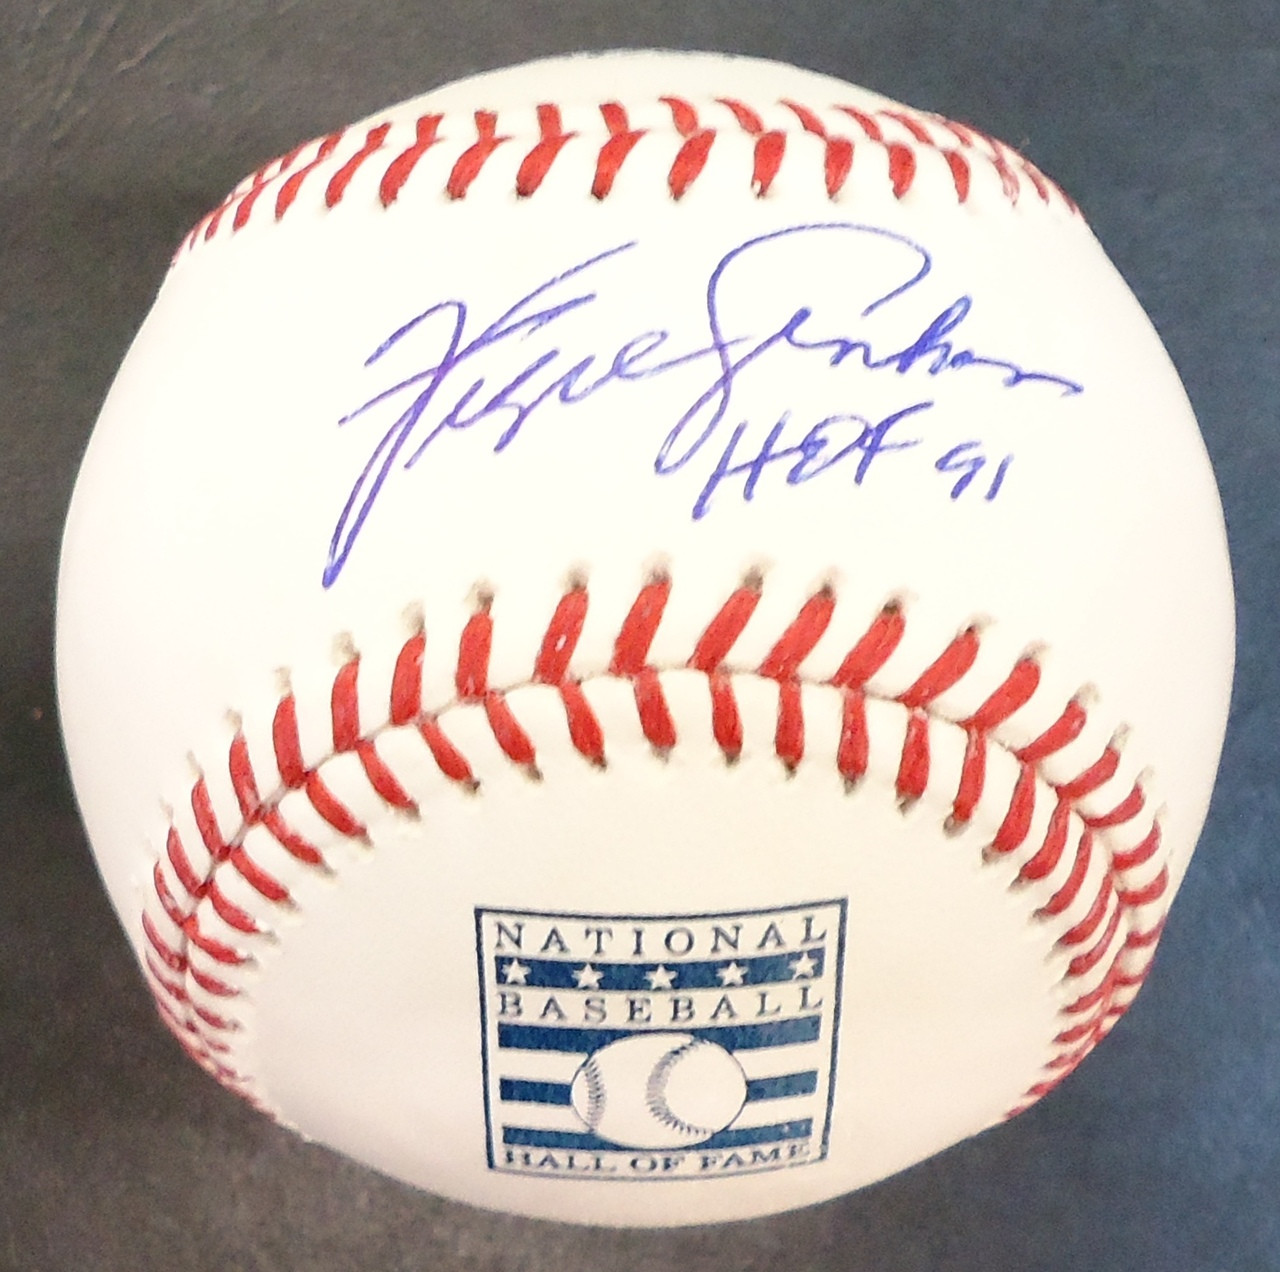 Fergie Jenkins Autographed Baseball - Official Hall of Fame Ball Inscribed  HOF 91